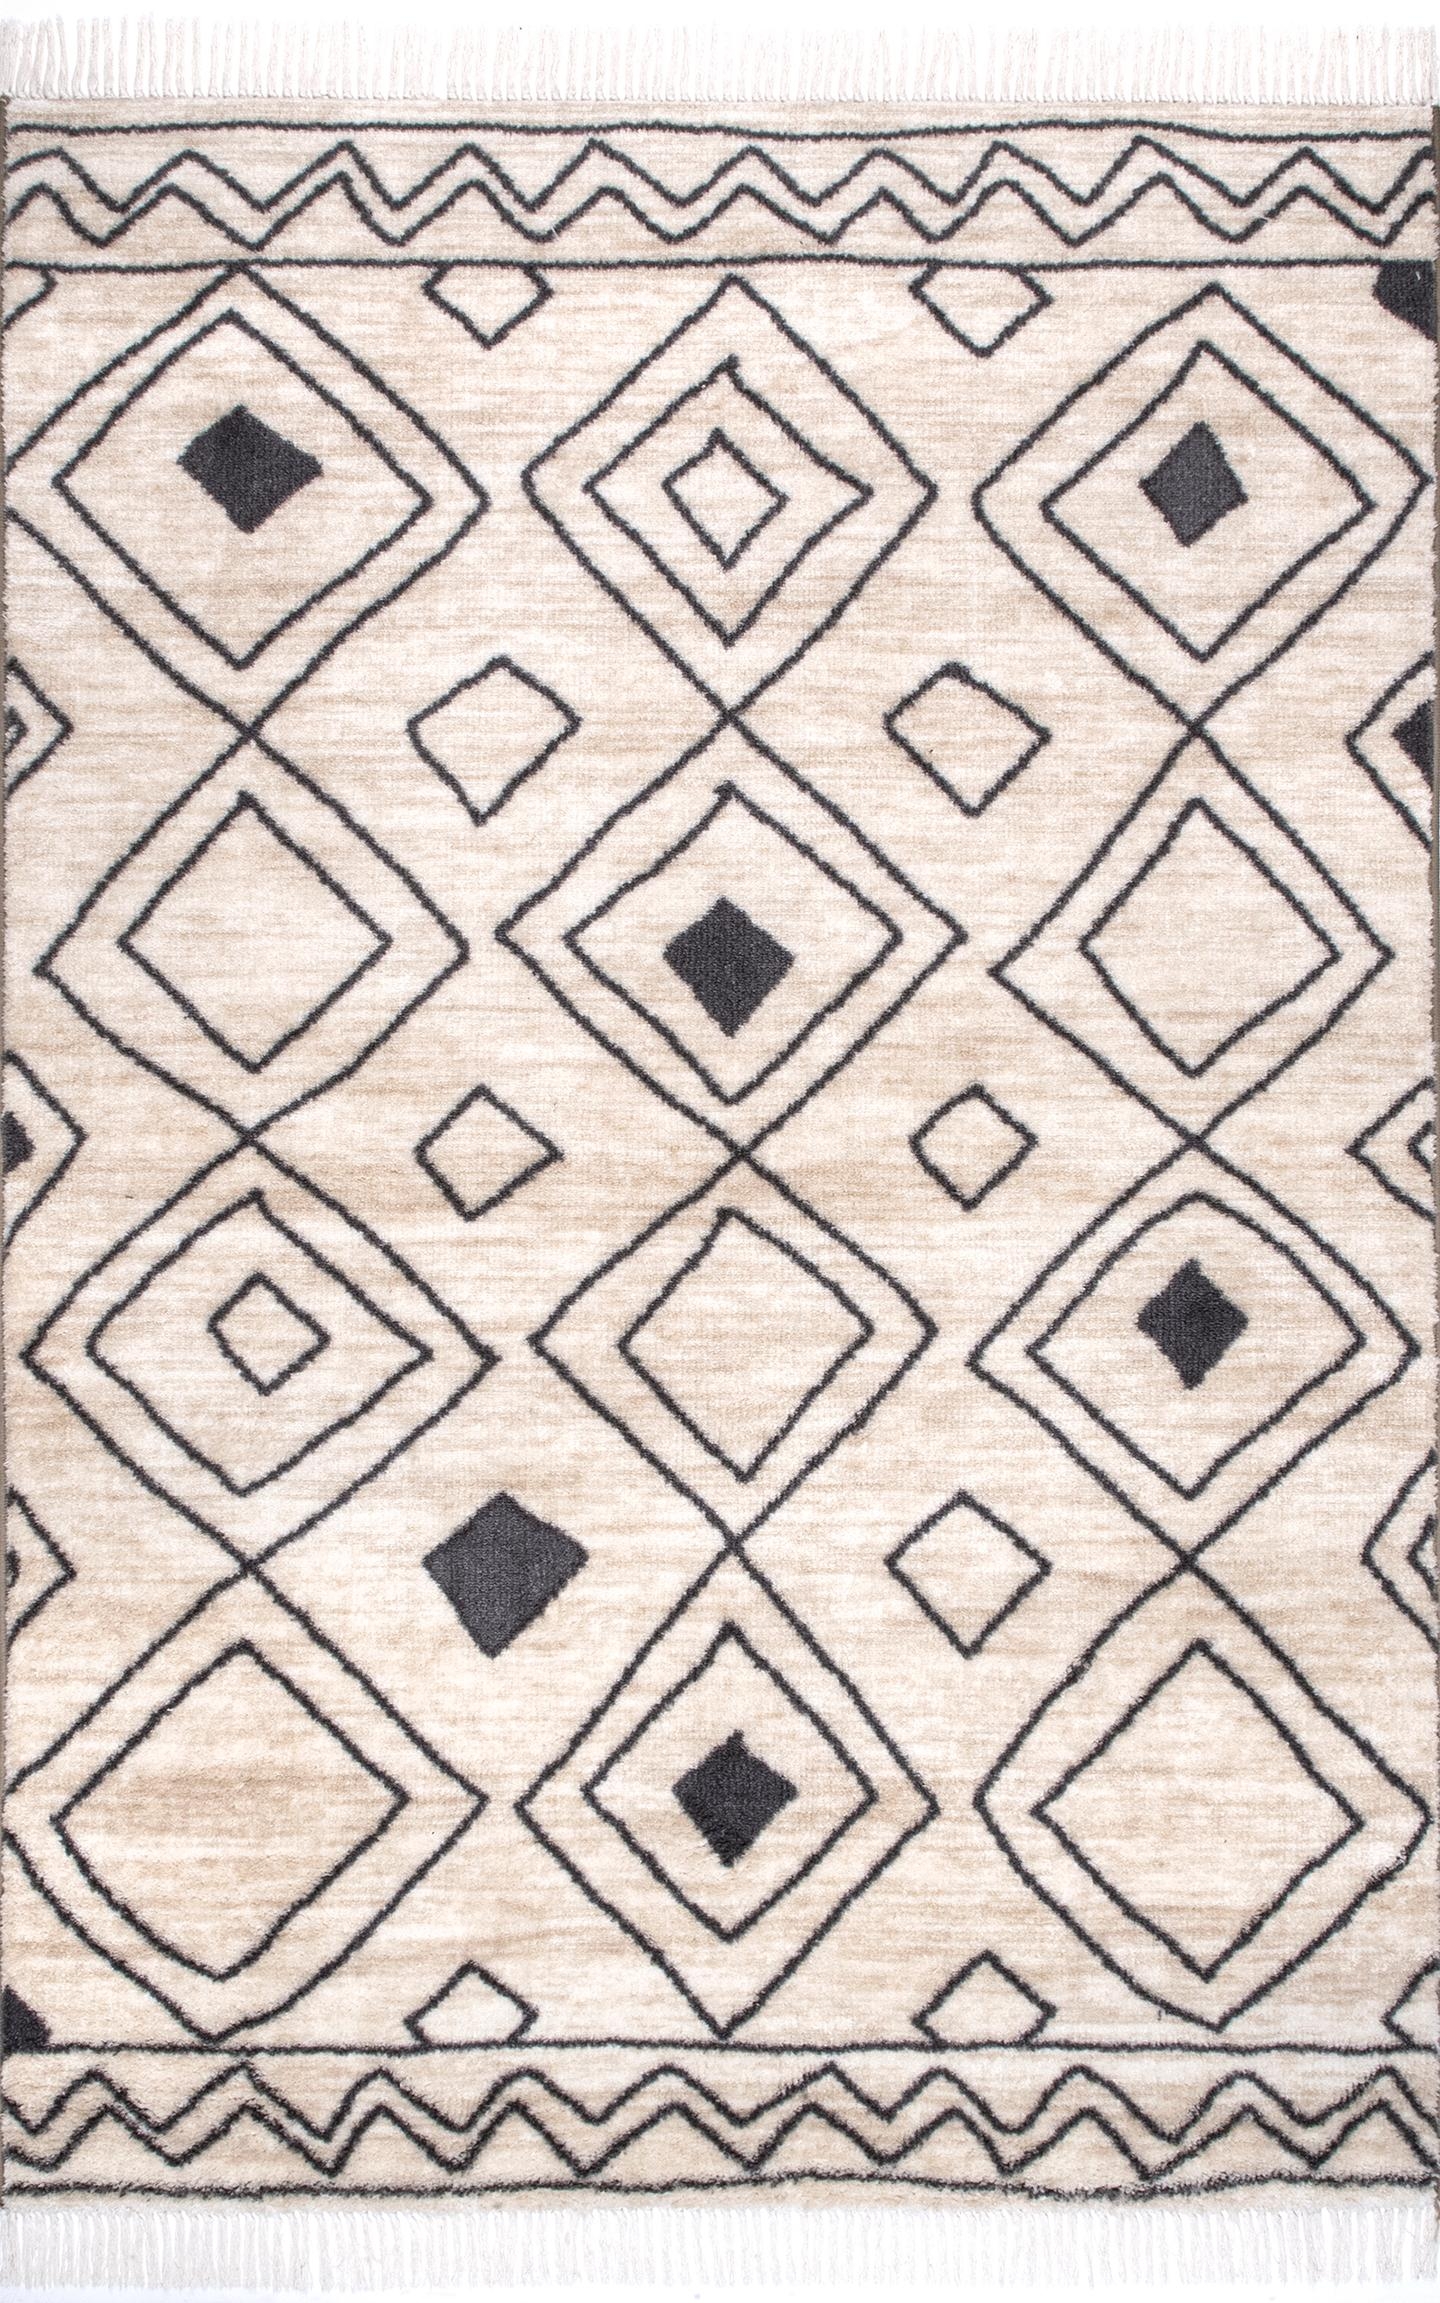 Kenley Spotted Diamonds Area Rug - Image 1